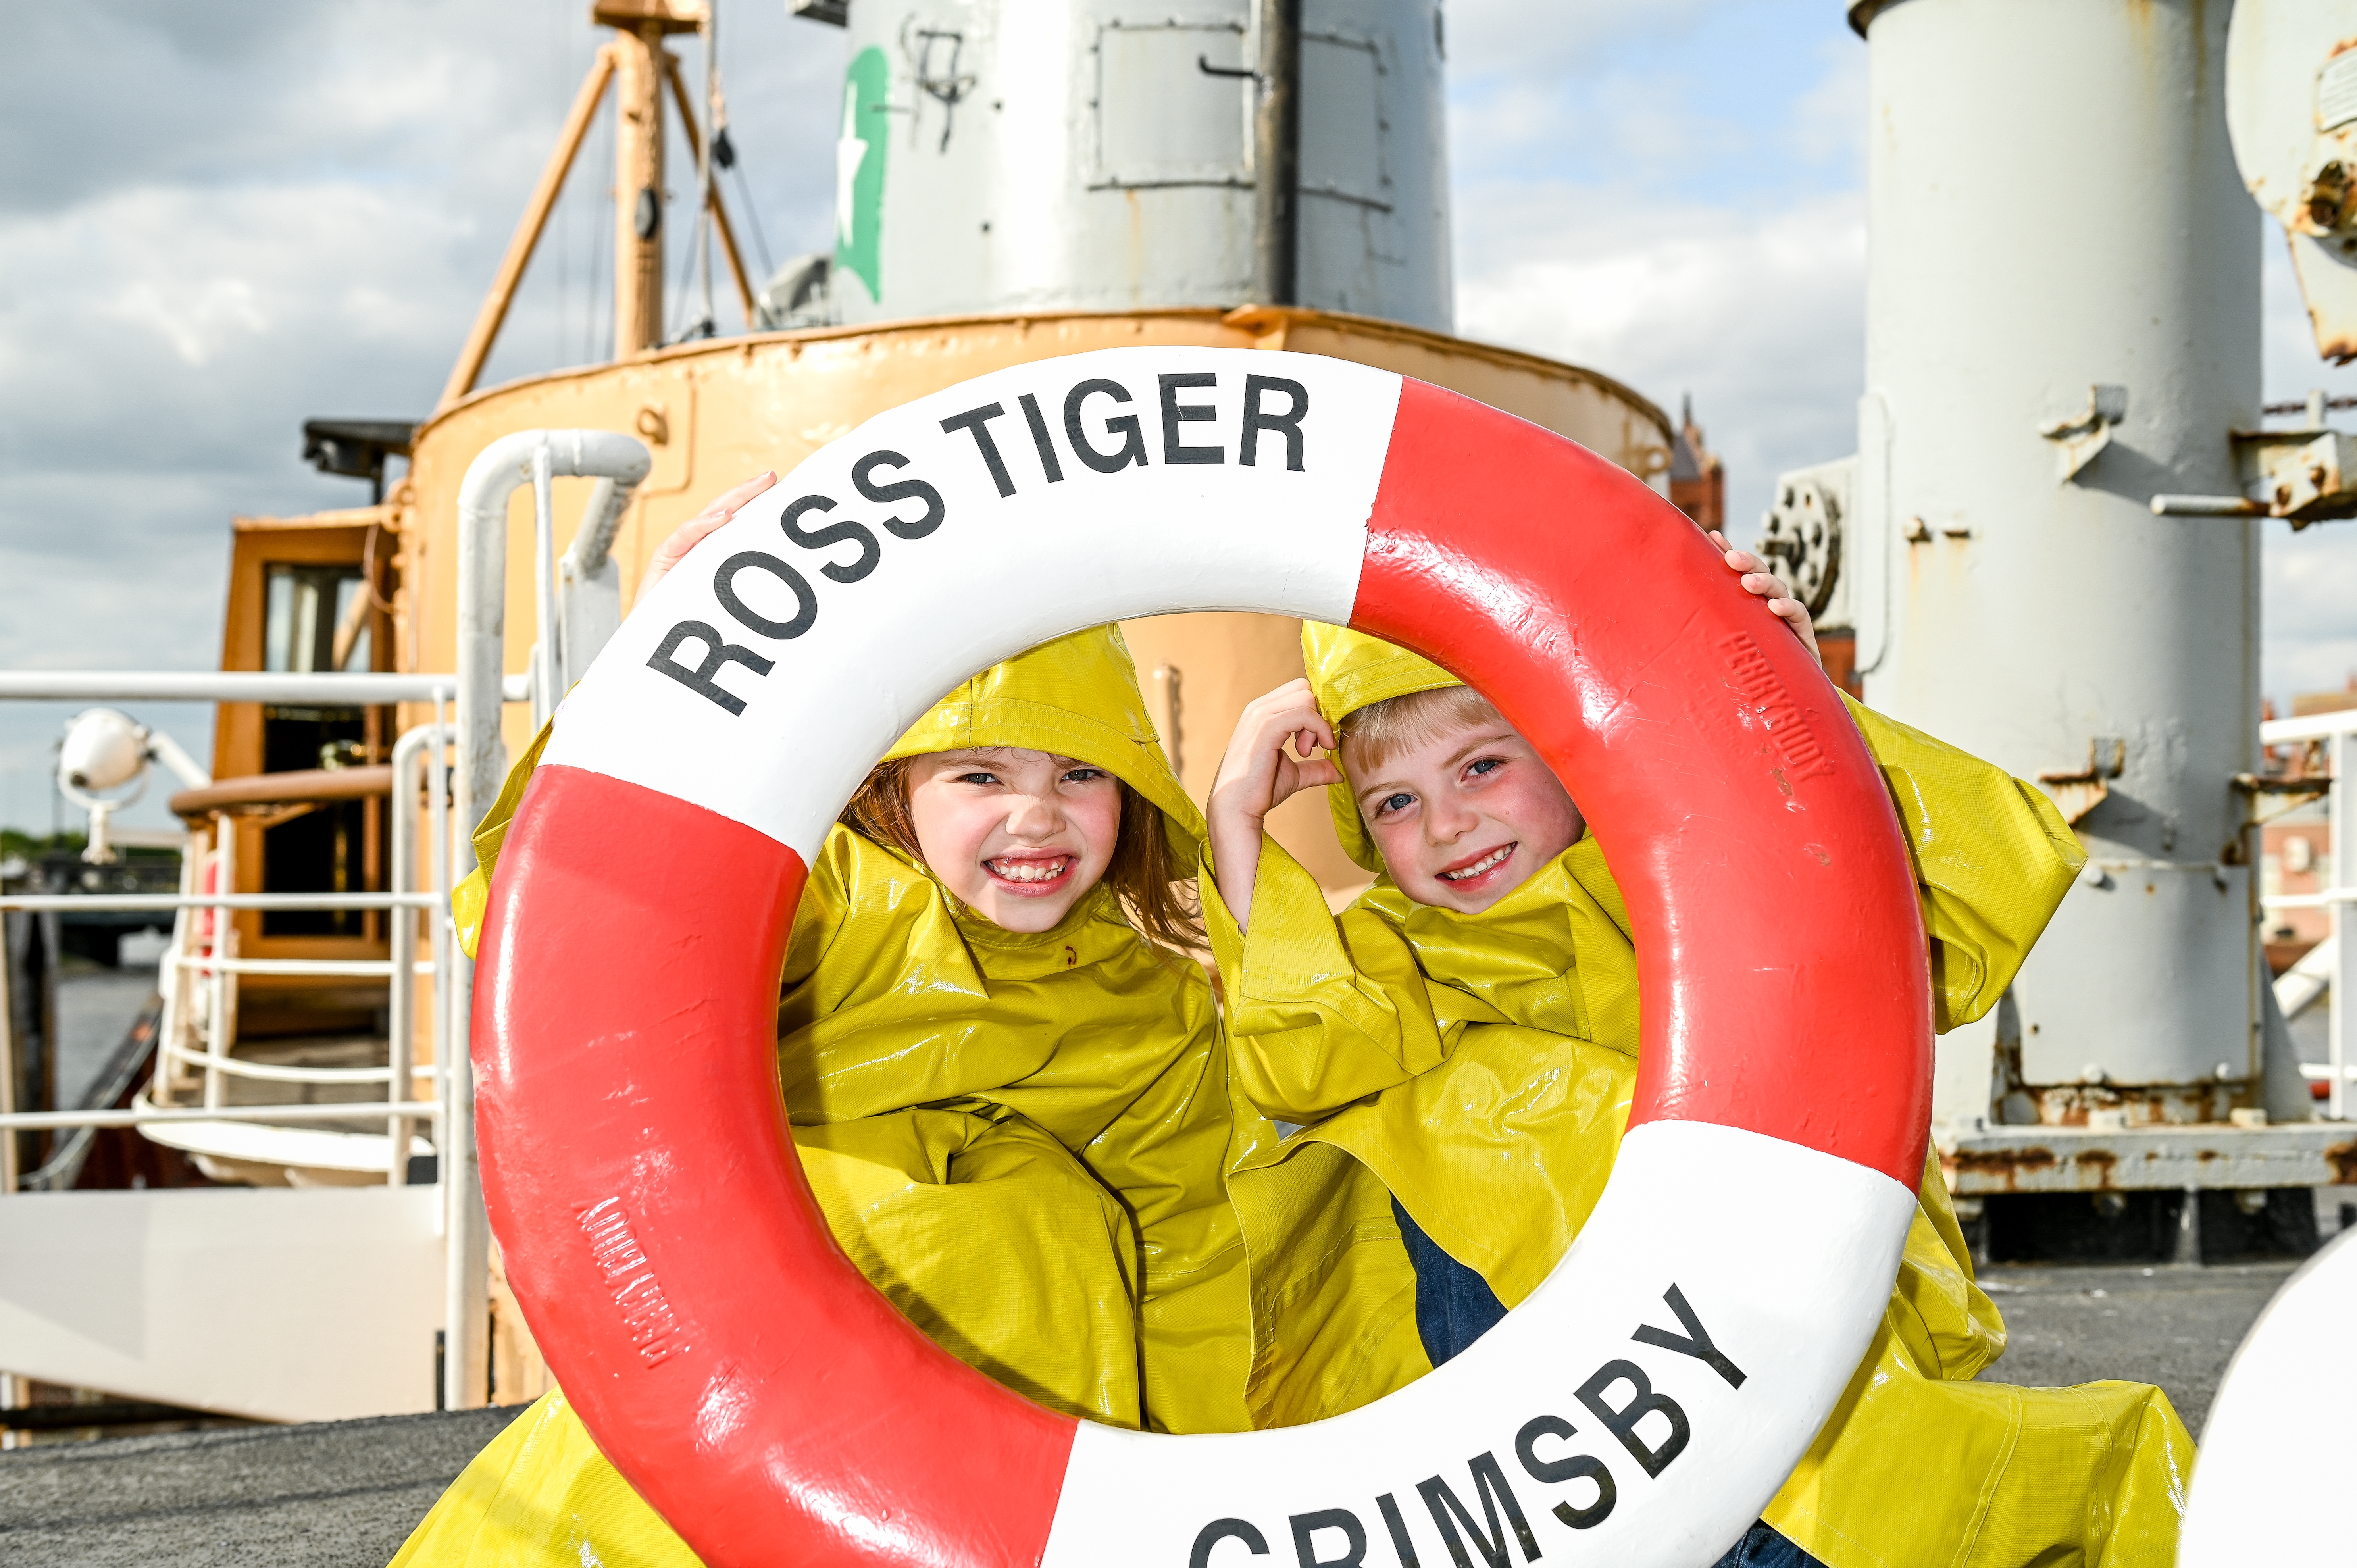 Tour the Ross Tiger